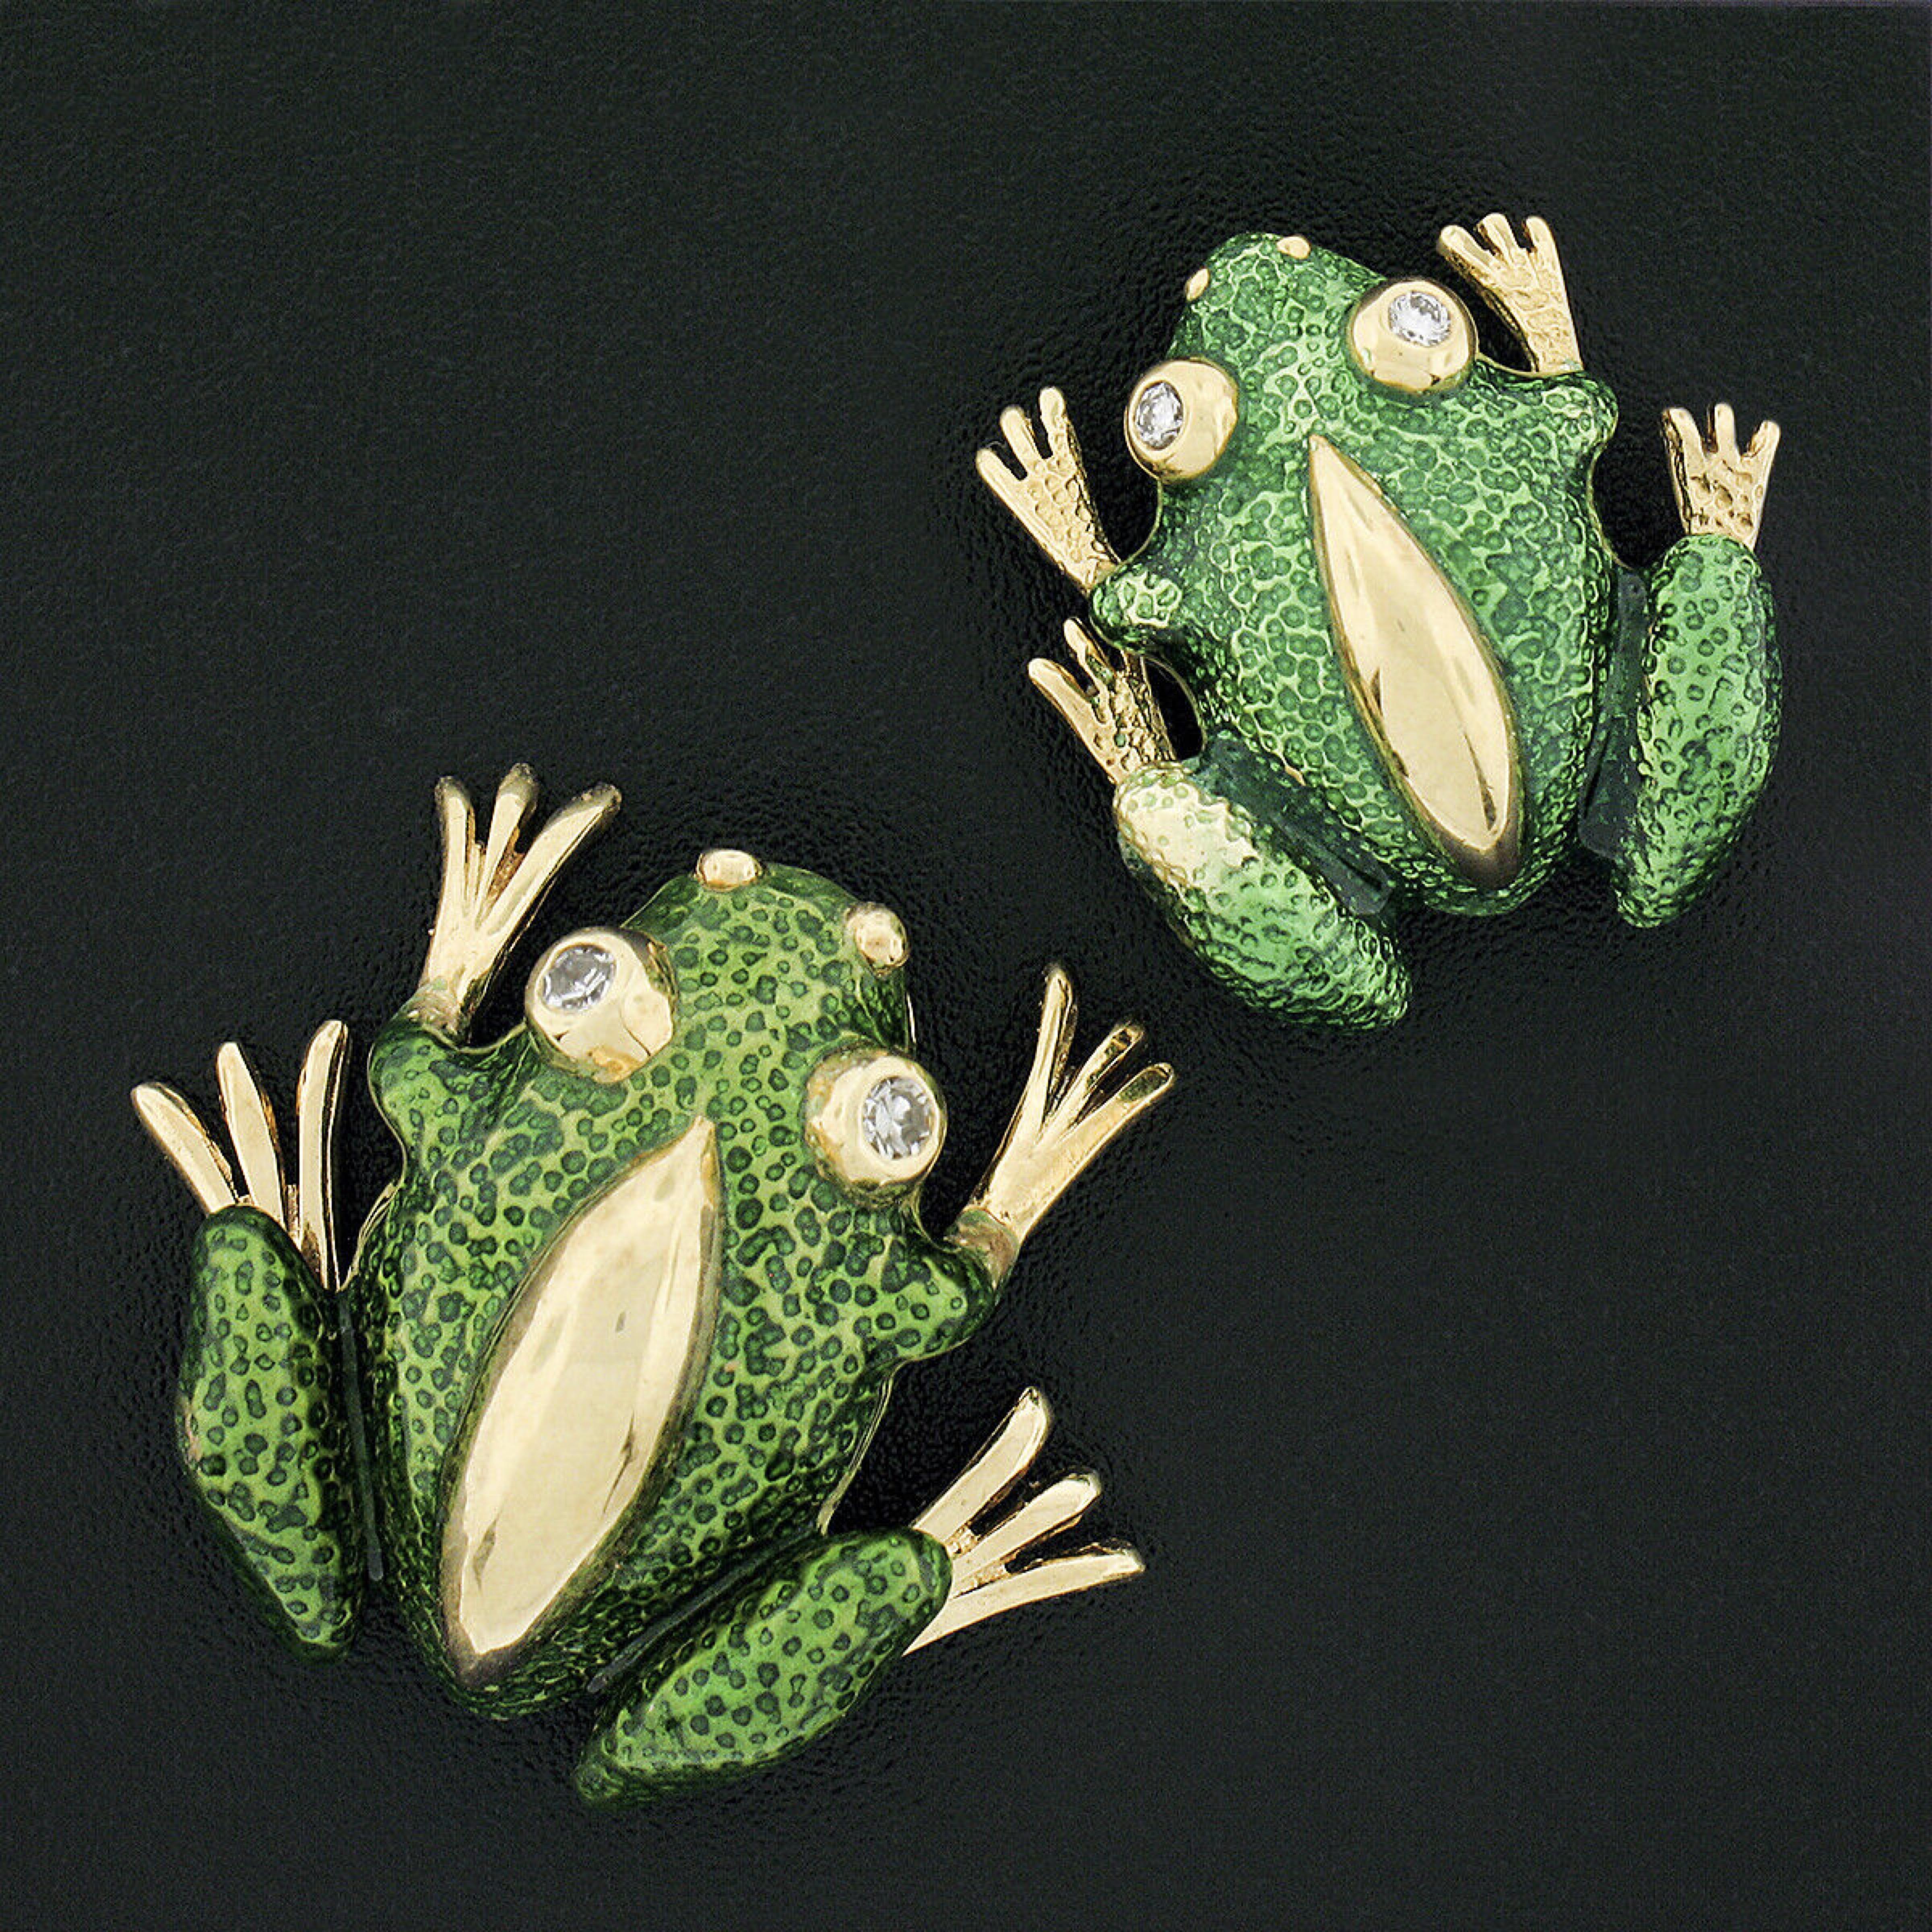 Here we have a pair of beautifully detailed brooch pins crafted from solid 18k yellow gold featuring a mother and baby frog that are matching in design. The frogs are covered in gorgeous green enamel throughout their body with visible textured gold